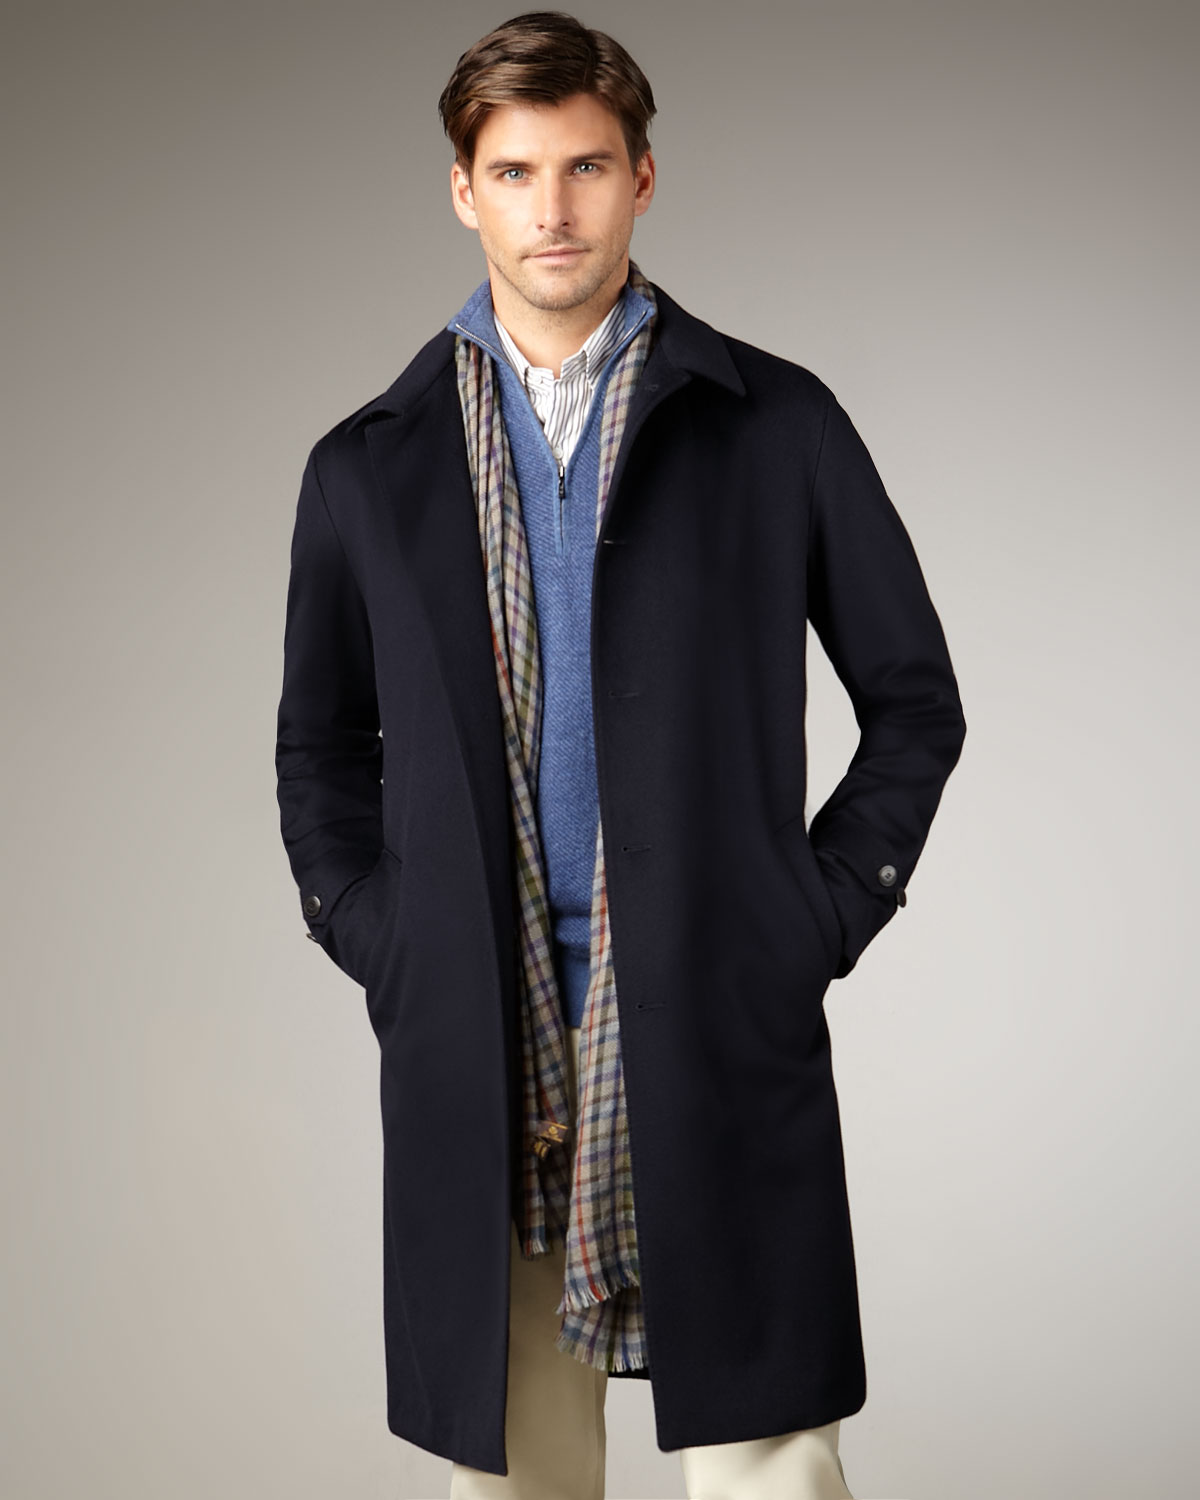 Lyst - Loro Piana Storm Longlined Cashmere Coat in Blue for Men